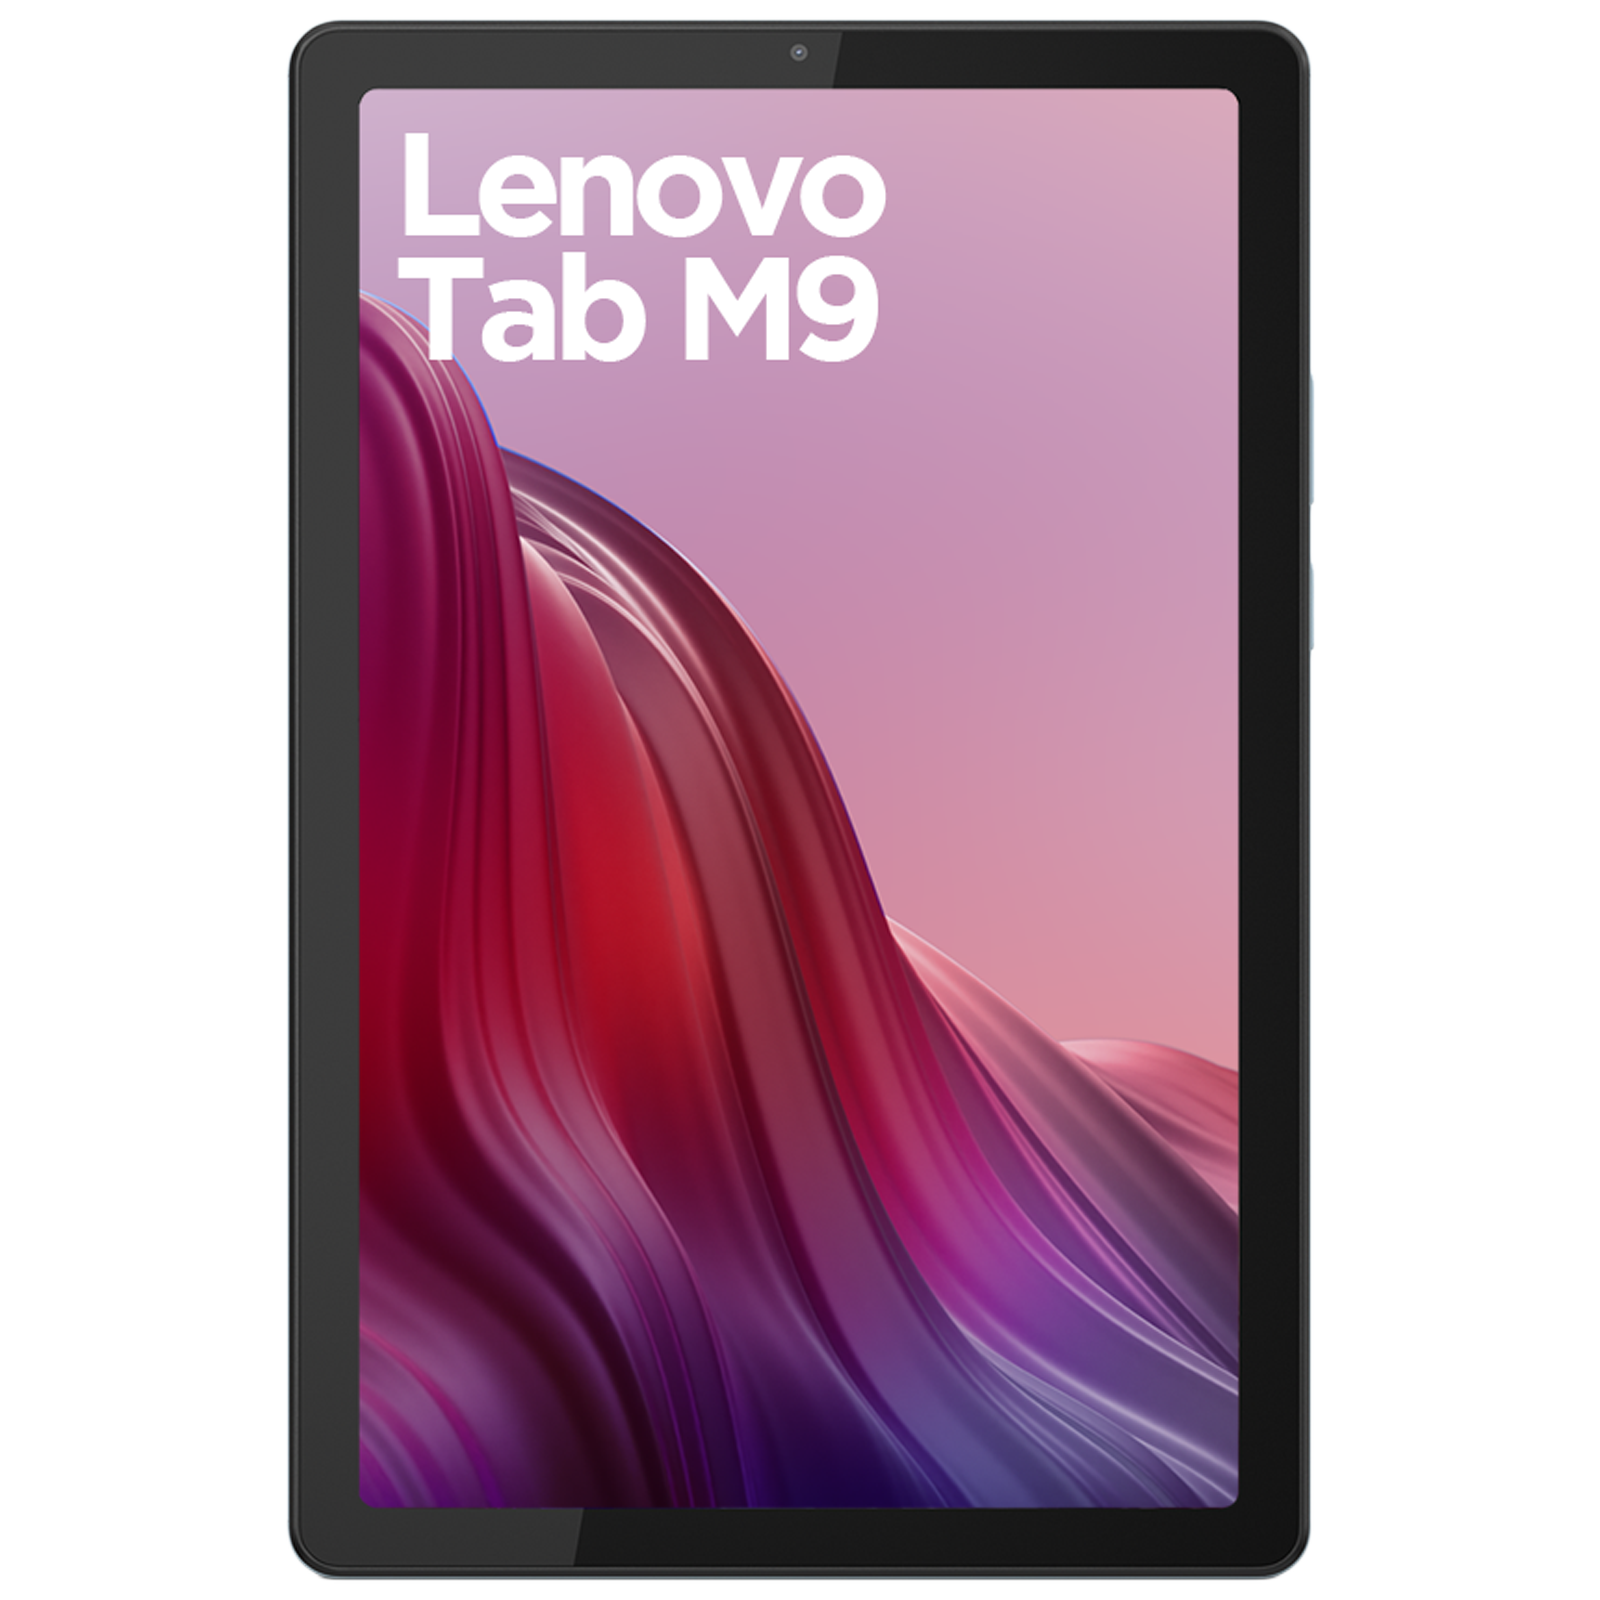 Buy Lenovo Tablets With Sim Card Slot Online at Best Prices